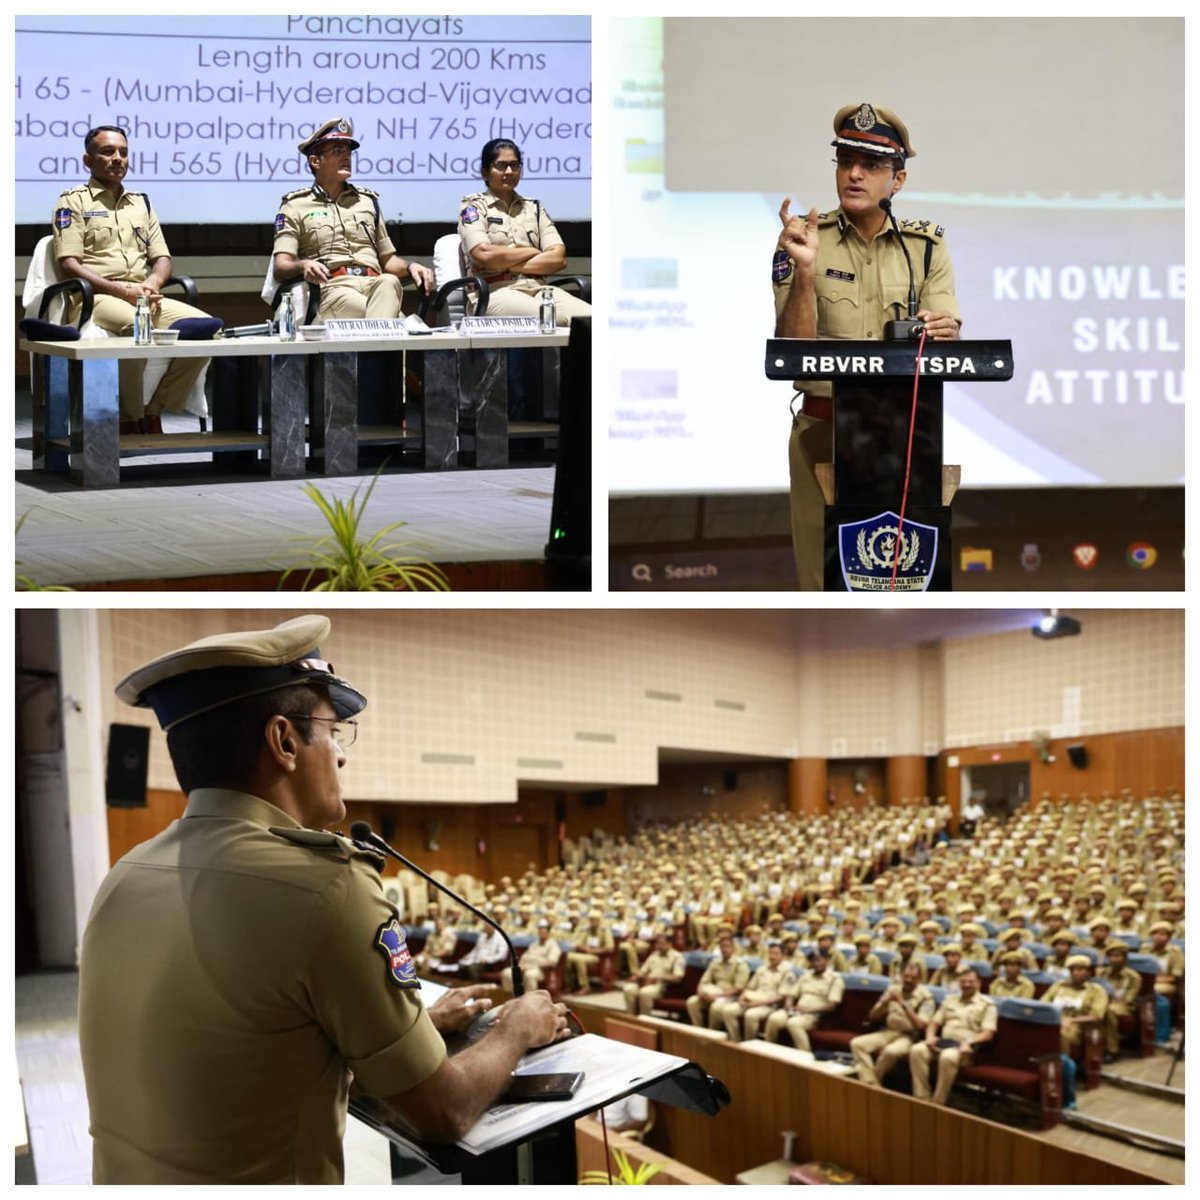 Today #CP_Rachakonda Sri Dr. Tarun Joshi IPS has briefed the #Trainee #SIs and #PCs at Telangana State Police Academy (TSPA) about #PollDayDuties, including Do's and Don'ts for trainees who are deployed to #RachakondaCommissionerate for #ElectionDuties. Sri. Muralidhar, IPS…